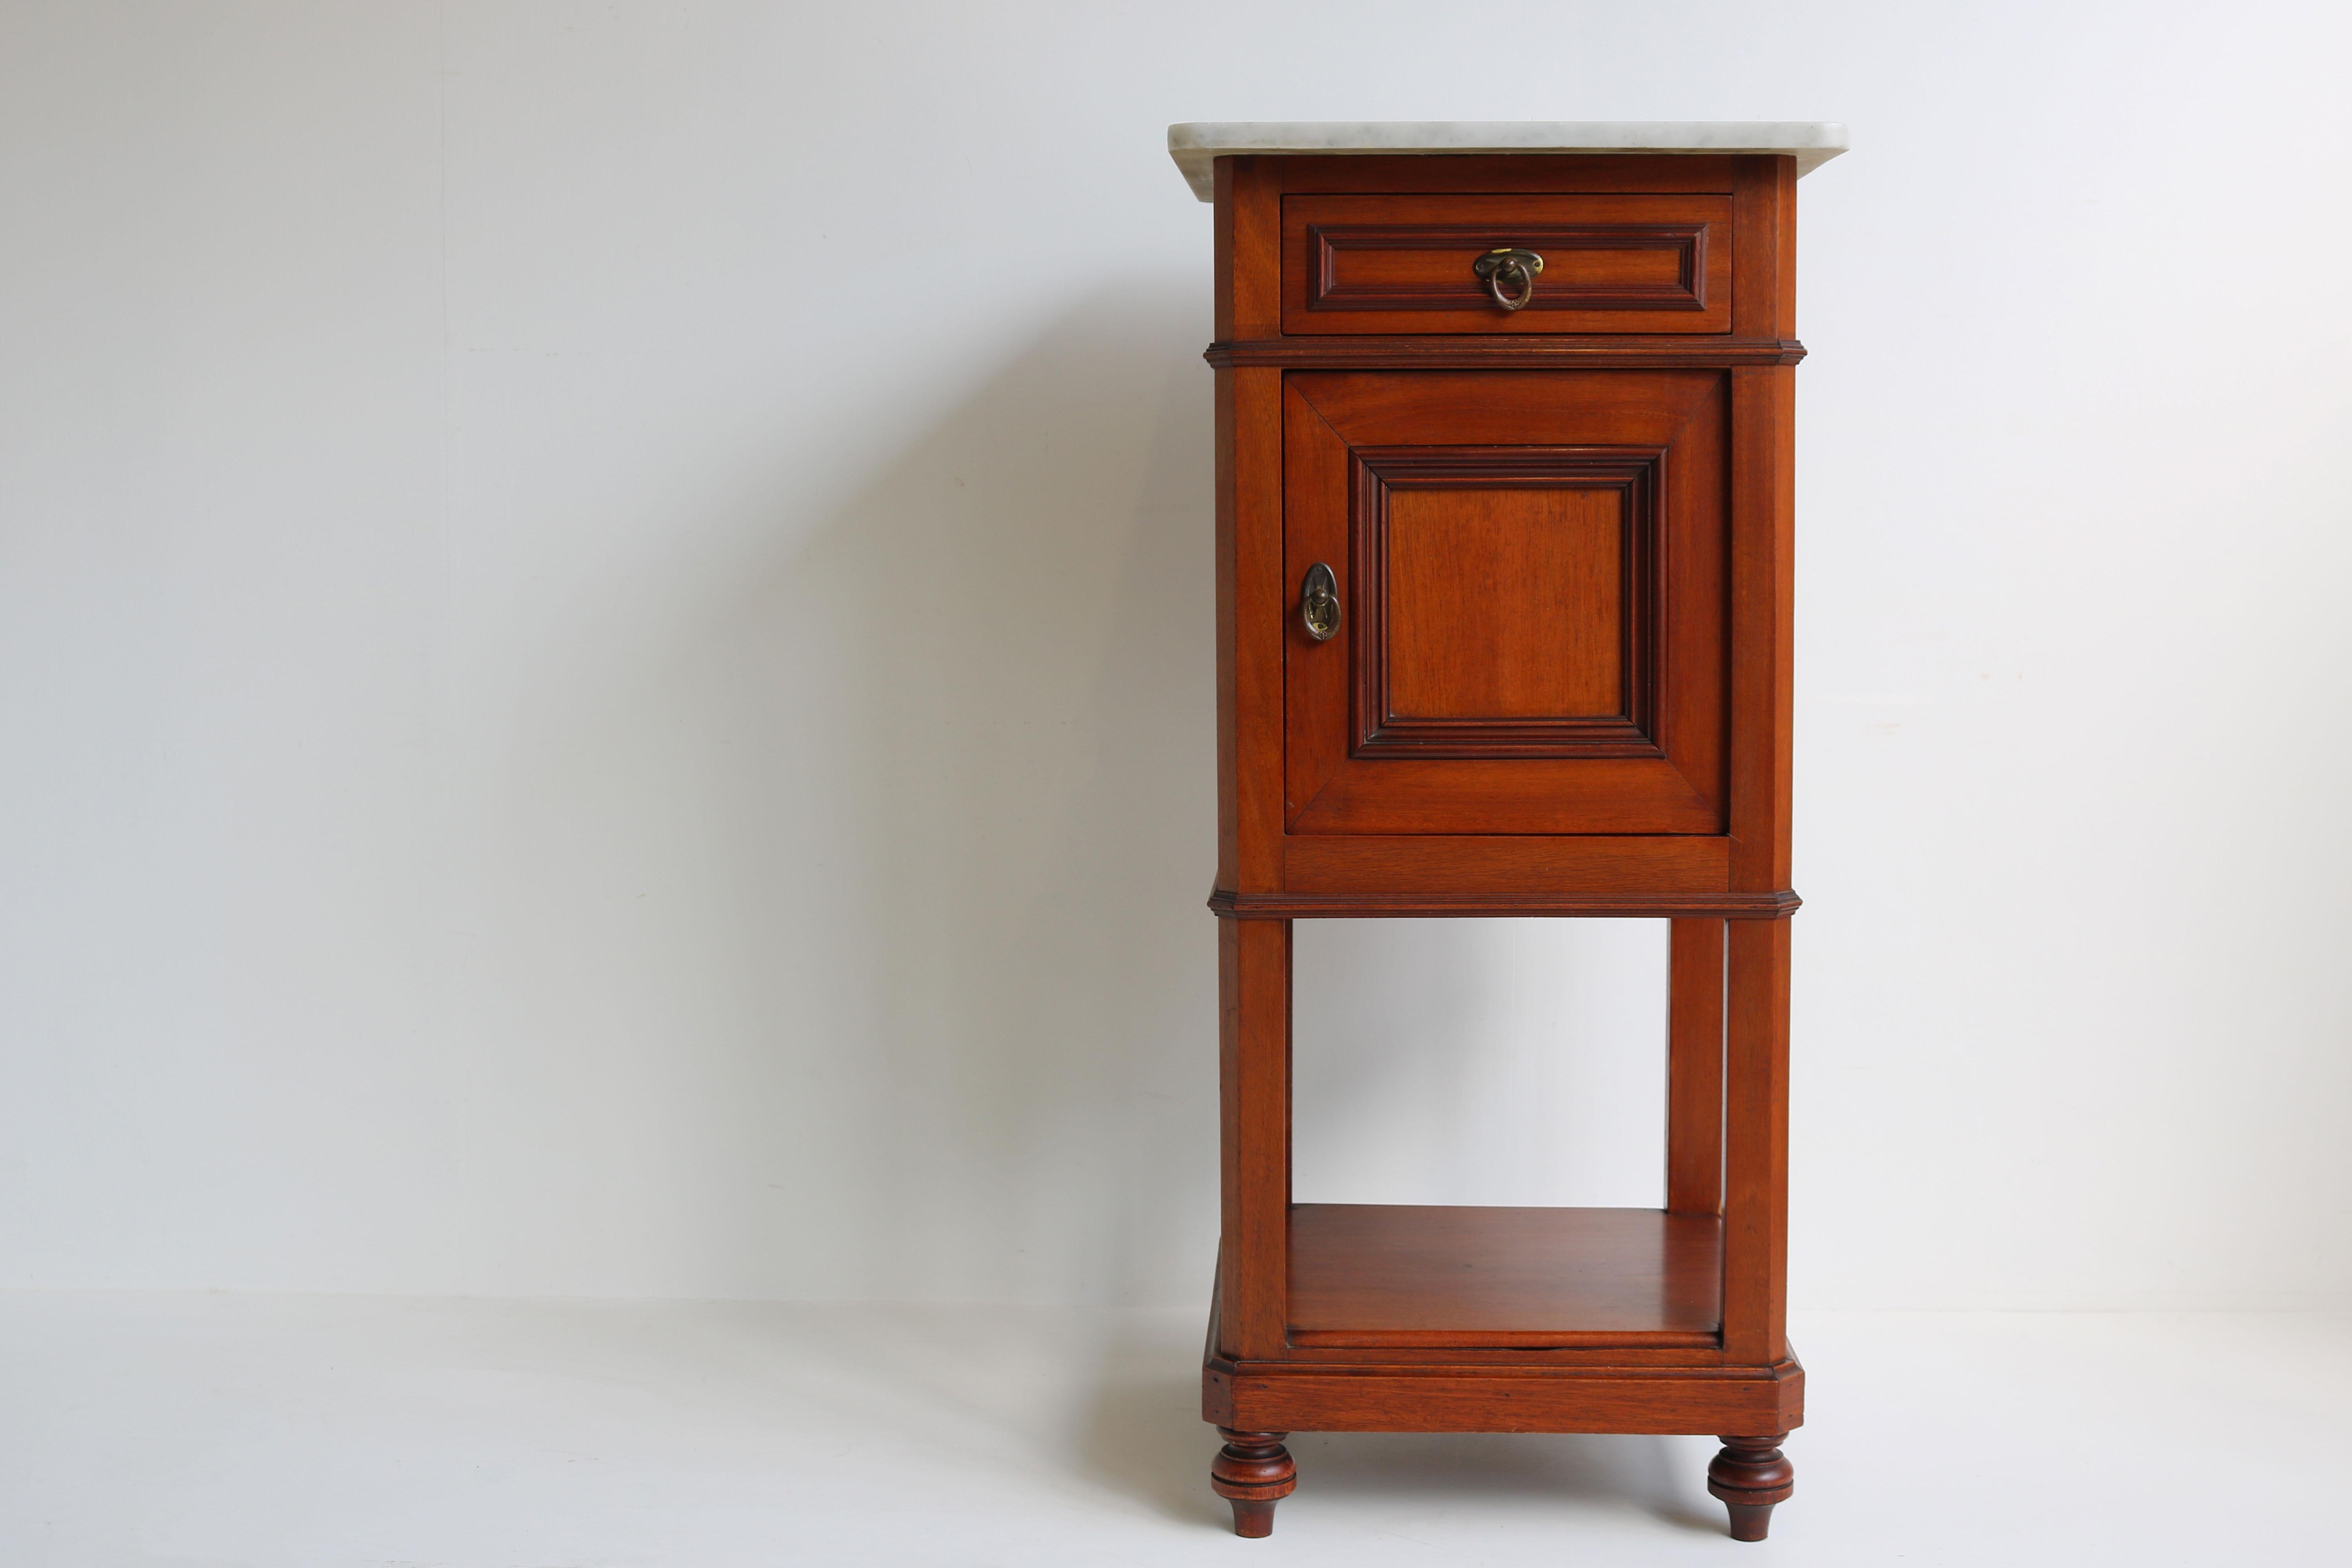 Gorgeous antique French 19th century nightstand / bedside table made out of Mahogany & Carrara marble 
Made out of Mahogany with a polished Italian Carrara marble top. 
The cabinet has a drawer & storage compartment and also a platform space